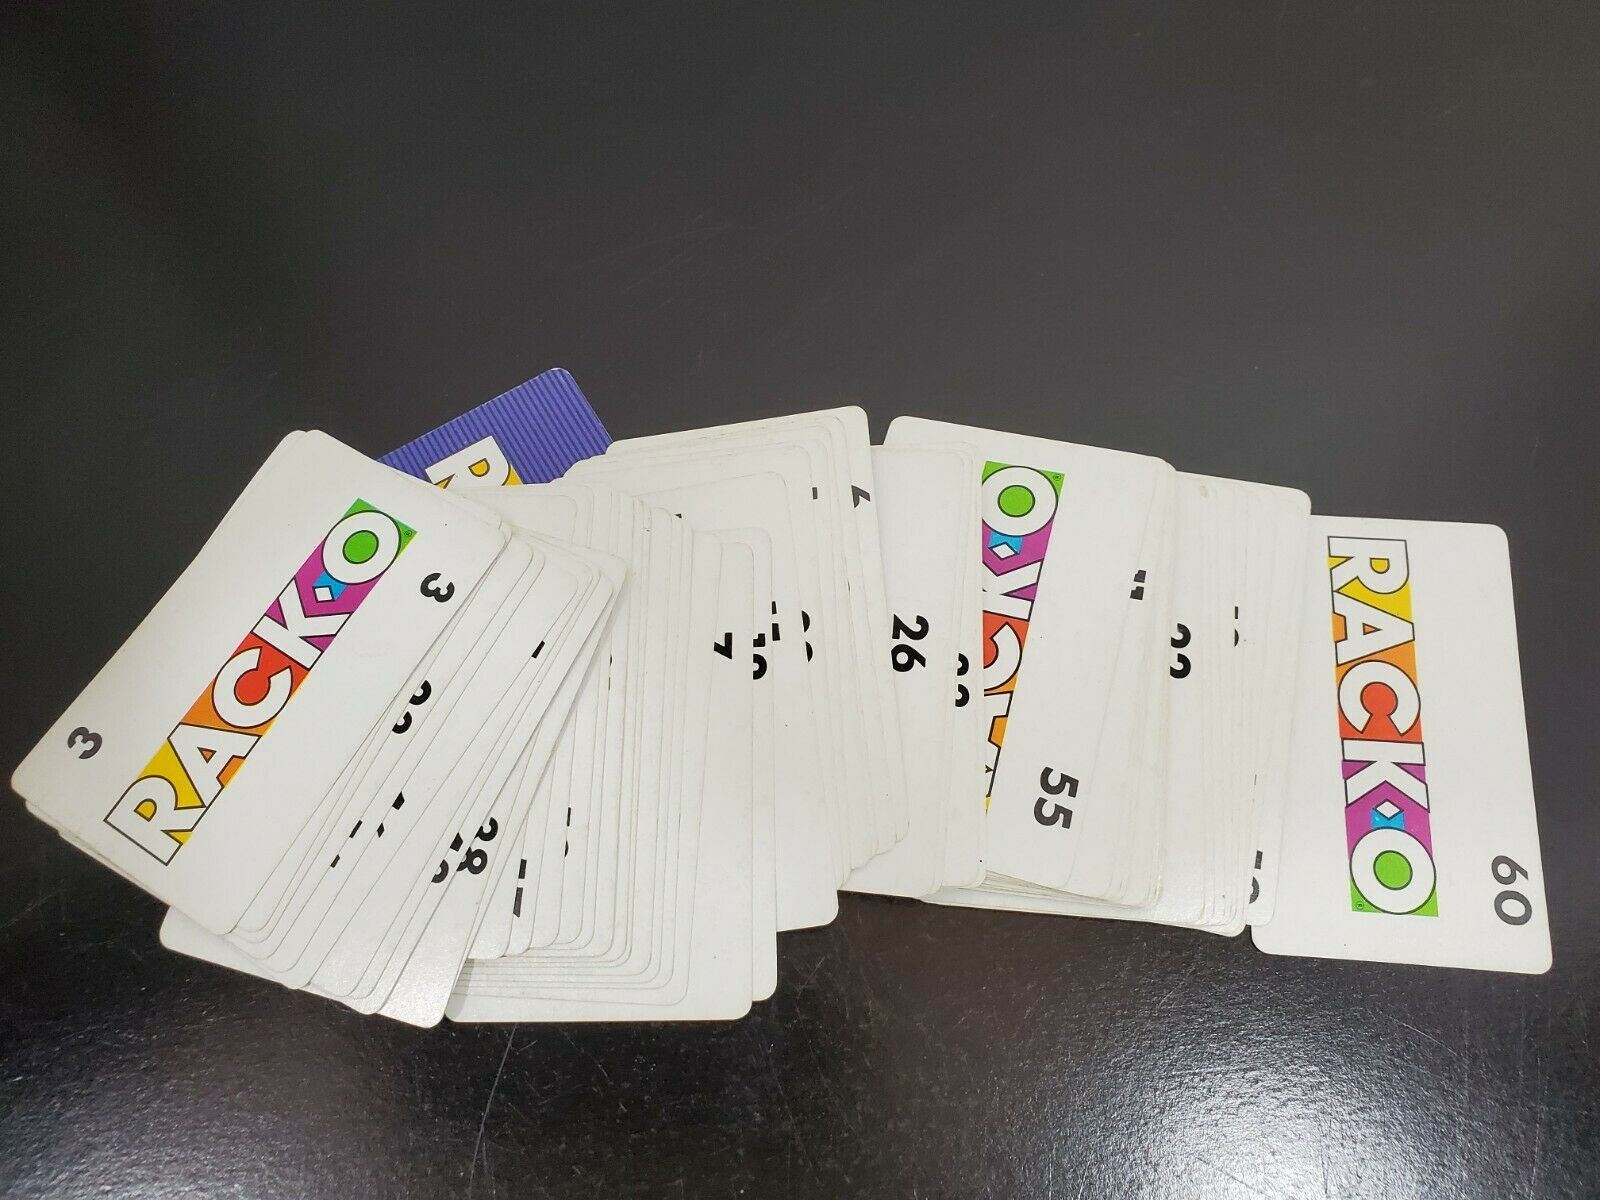 Details about   Rack-O Card Game replacement parts 